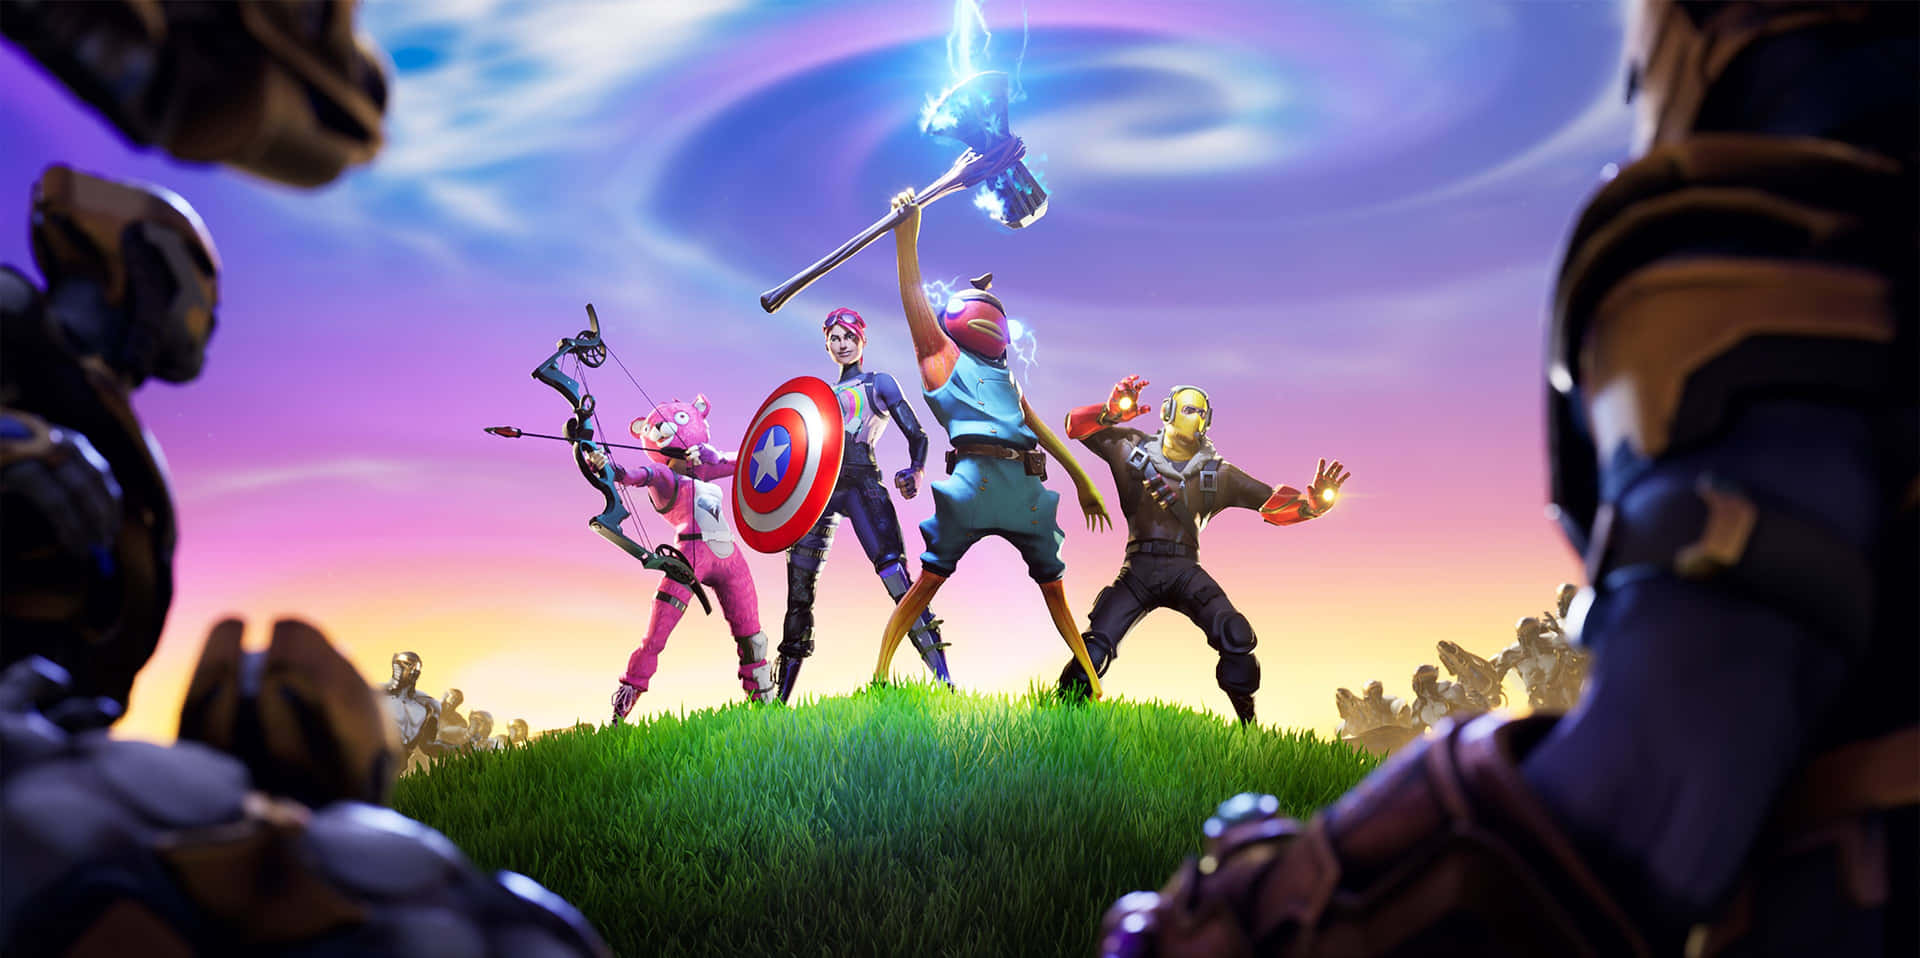 Tiko With Characters Holding Avengers Weapons Wallpaper